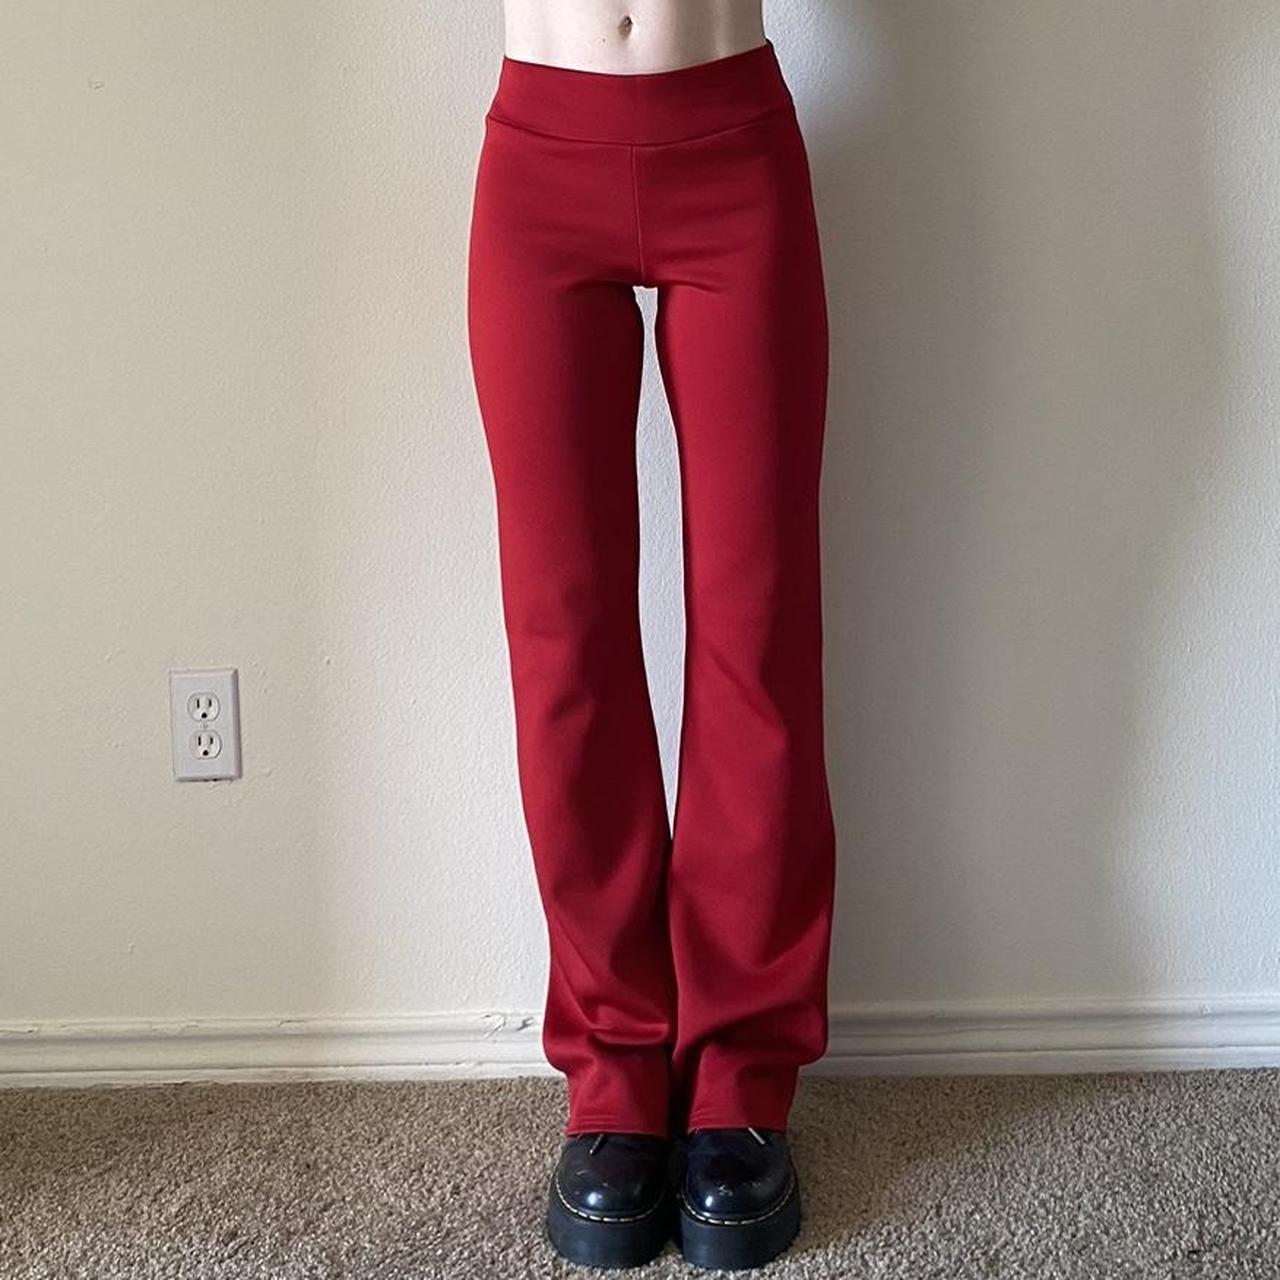 Low rise red bootcut flare yoga / casual pants •... - Depop